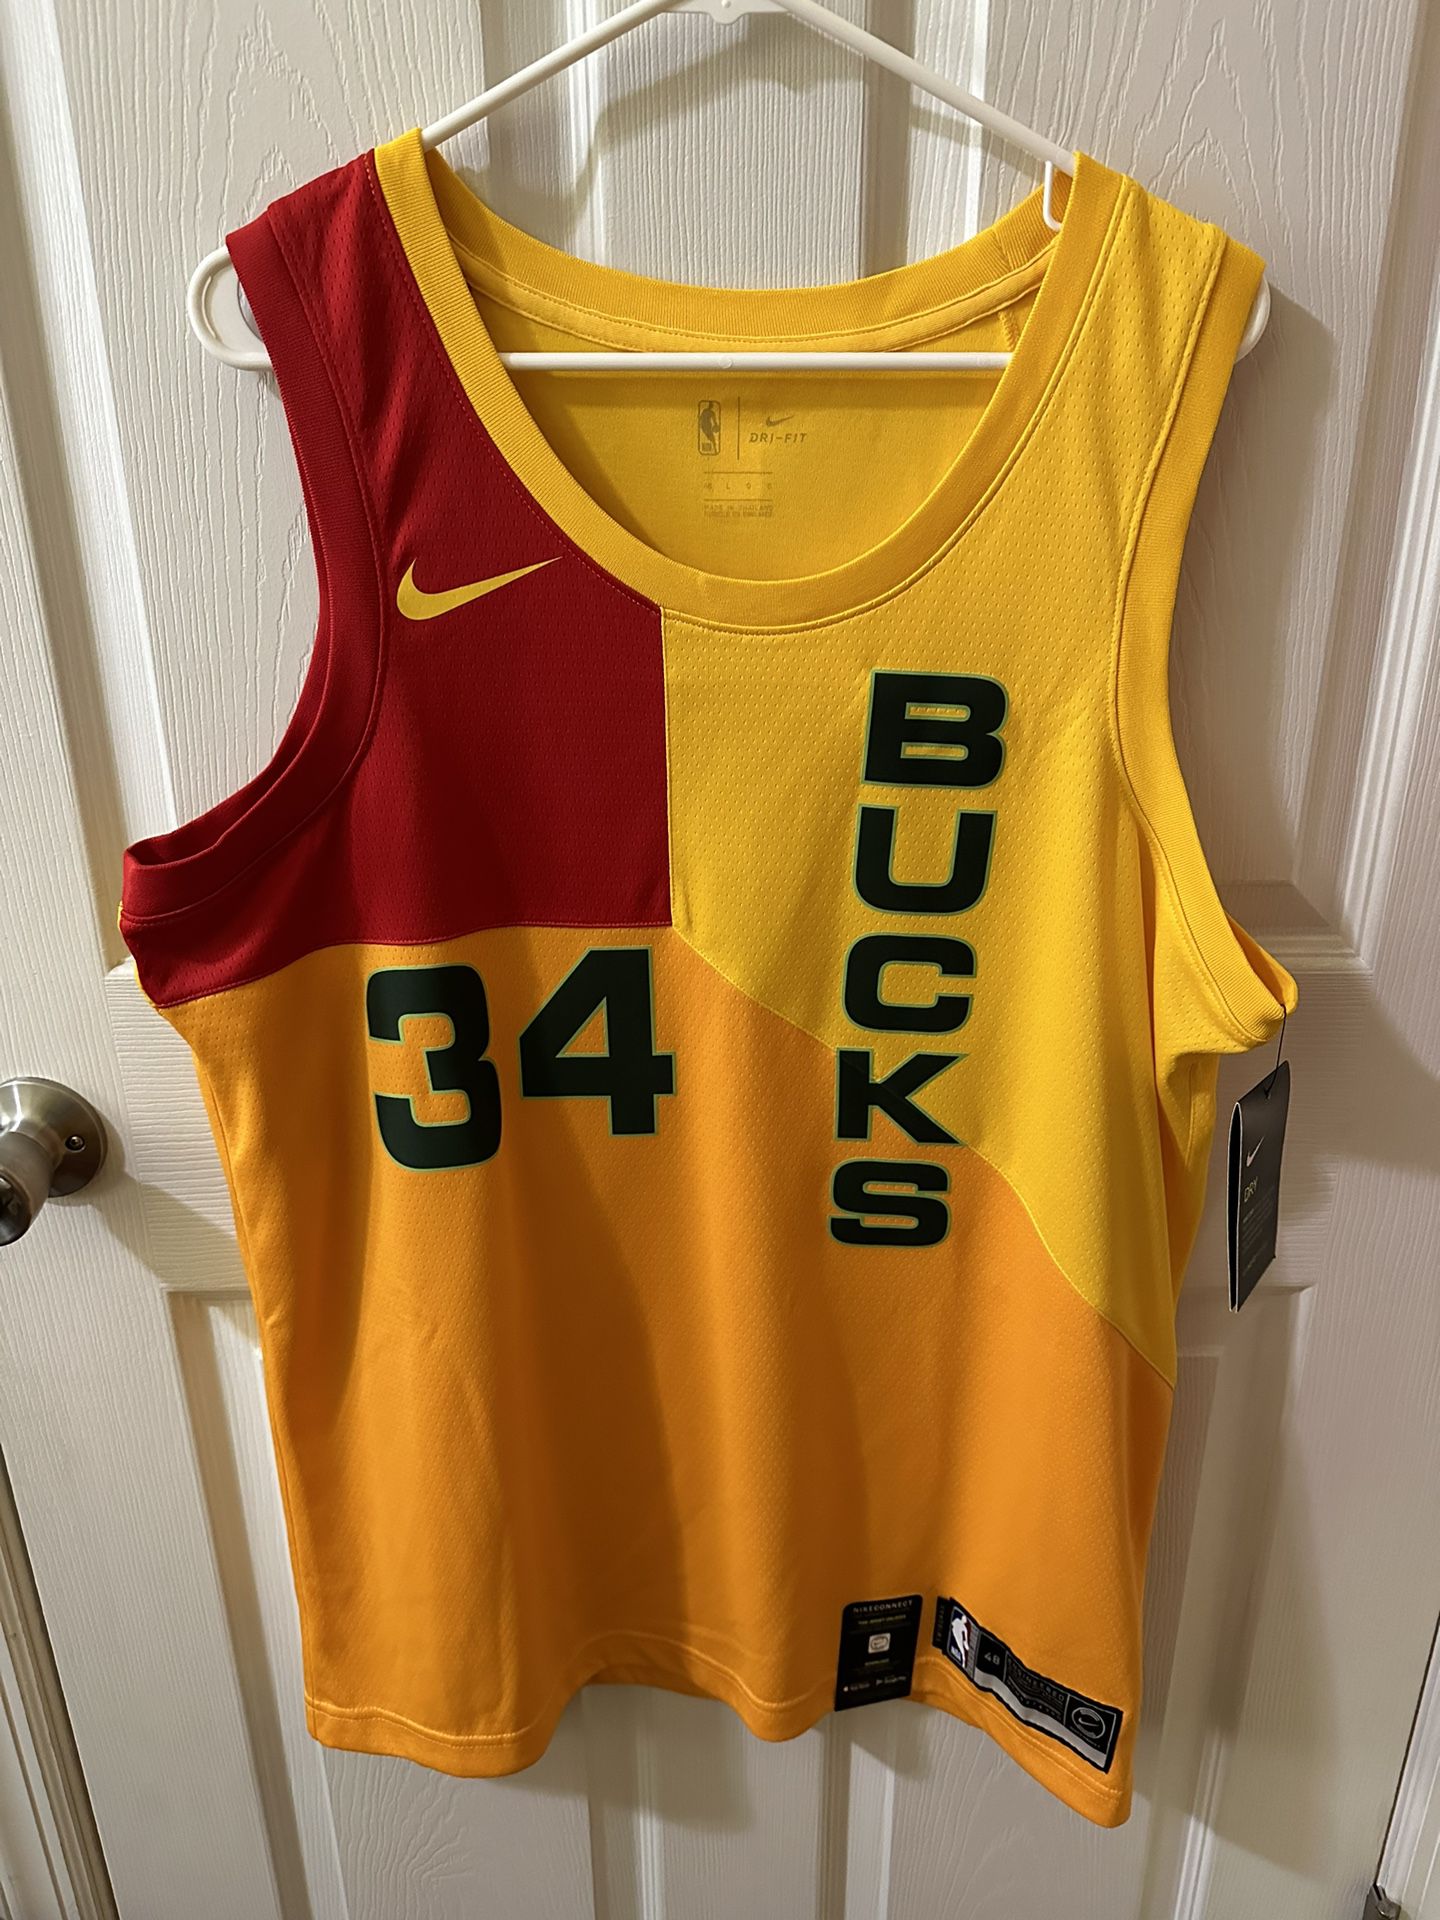 Authentic NBA Jerseys For sale for Sale in Jersey City, NJ - OfferUp